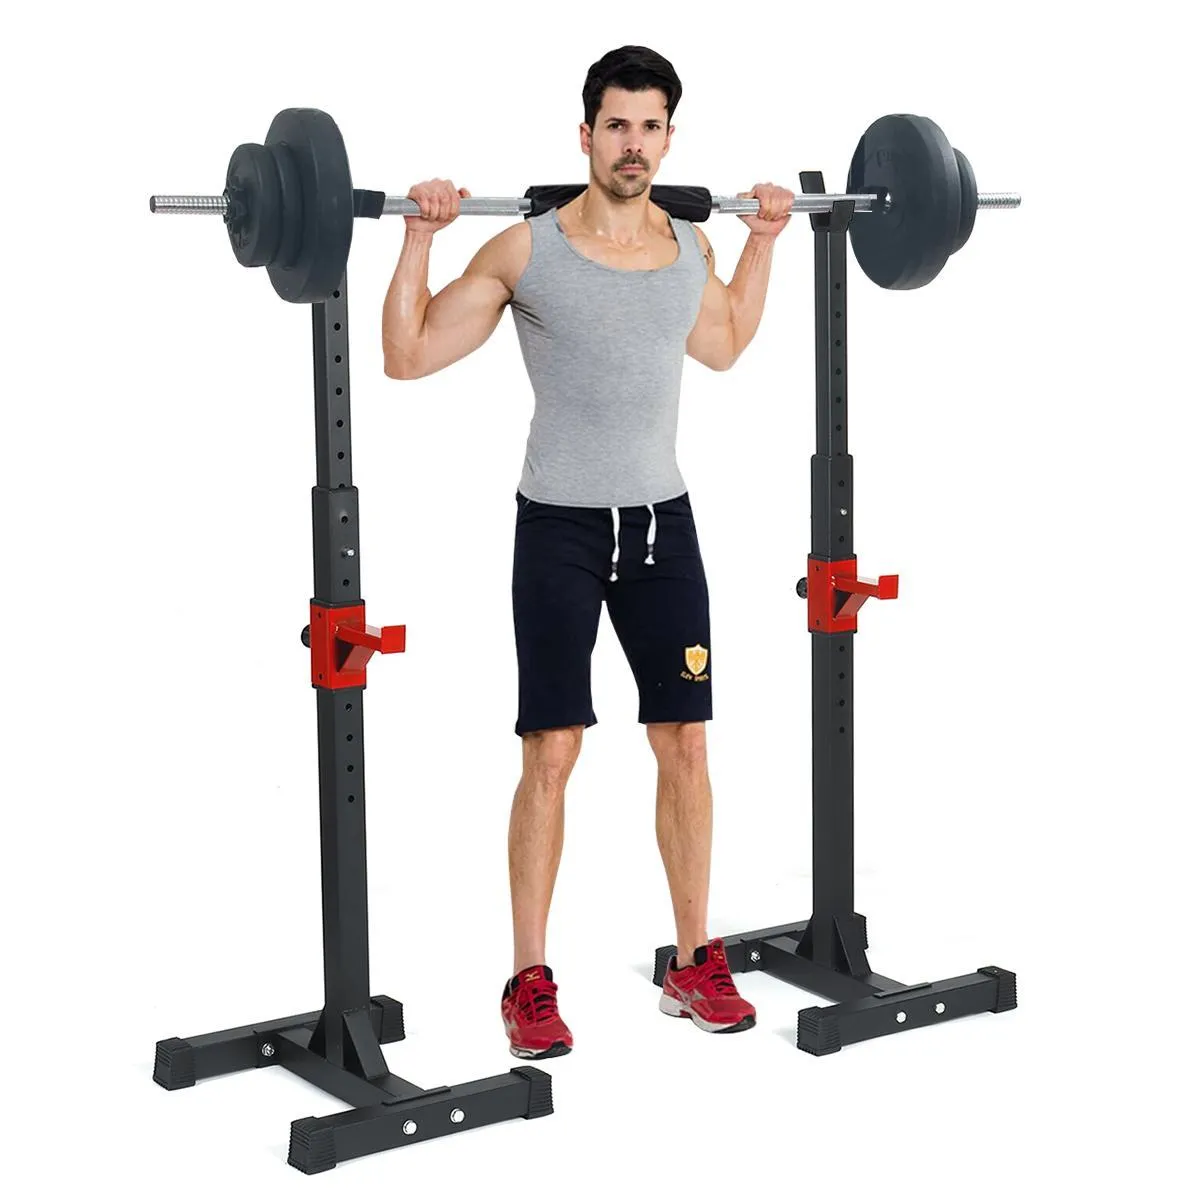 Steel Weight Lifting Dumbbell Bar Adjustable Squat Rack Exercise Stands Gym Fitness Workout Barbell Racks Multi-Function Station Bench Press Stand Sport Equipment